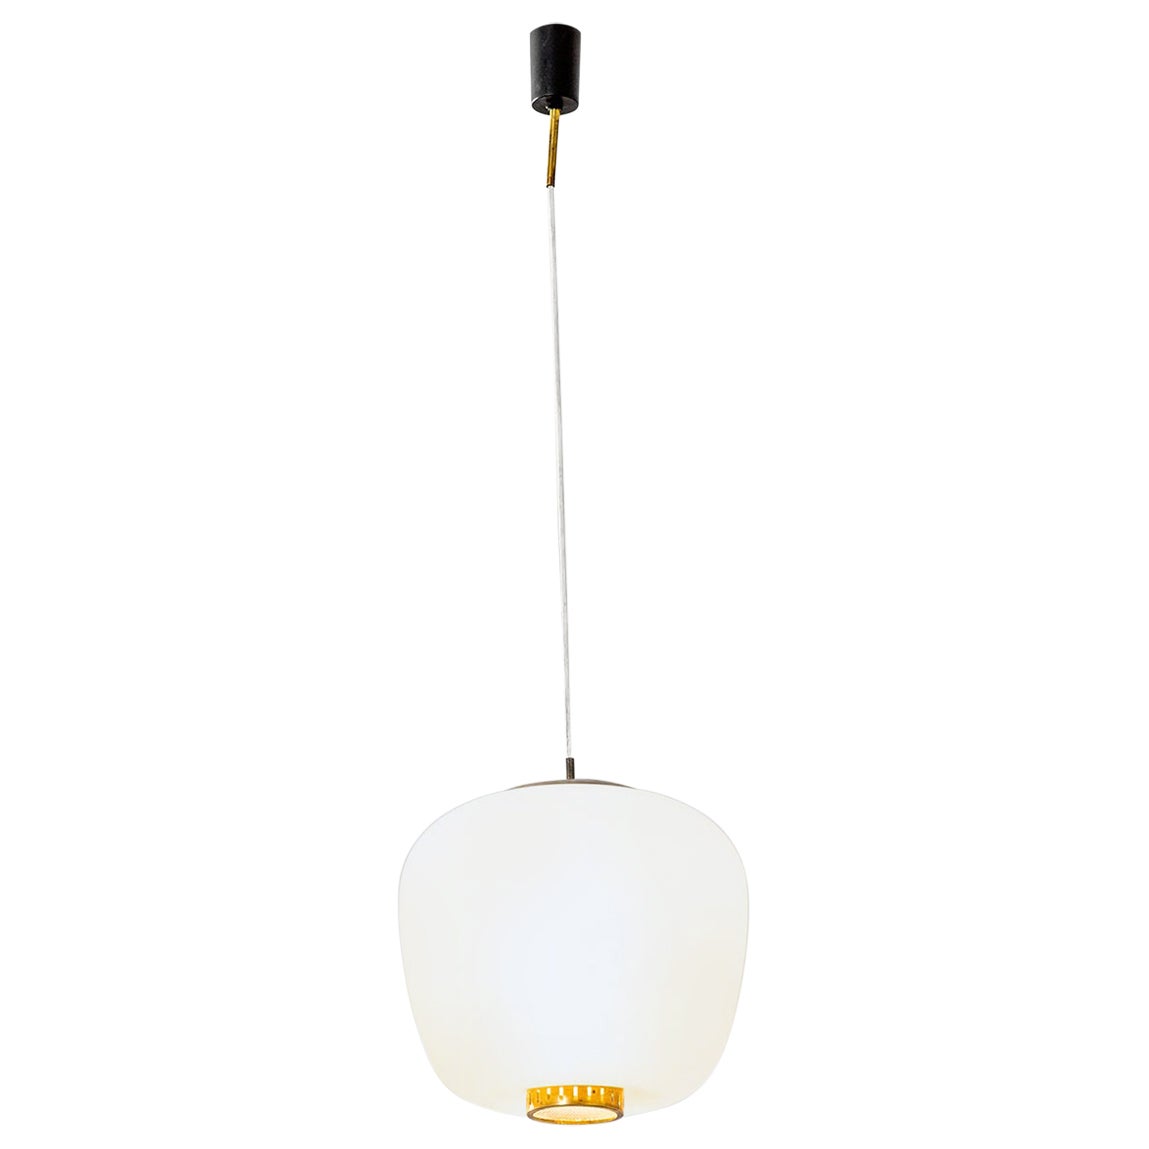 20th Century Stilnovo Pendant Lamp in White Opaline Glass and Brass Details, 50s For Sale